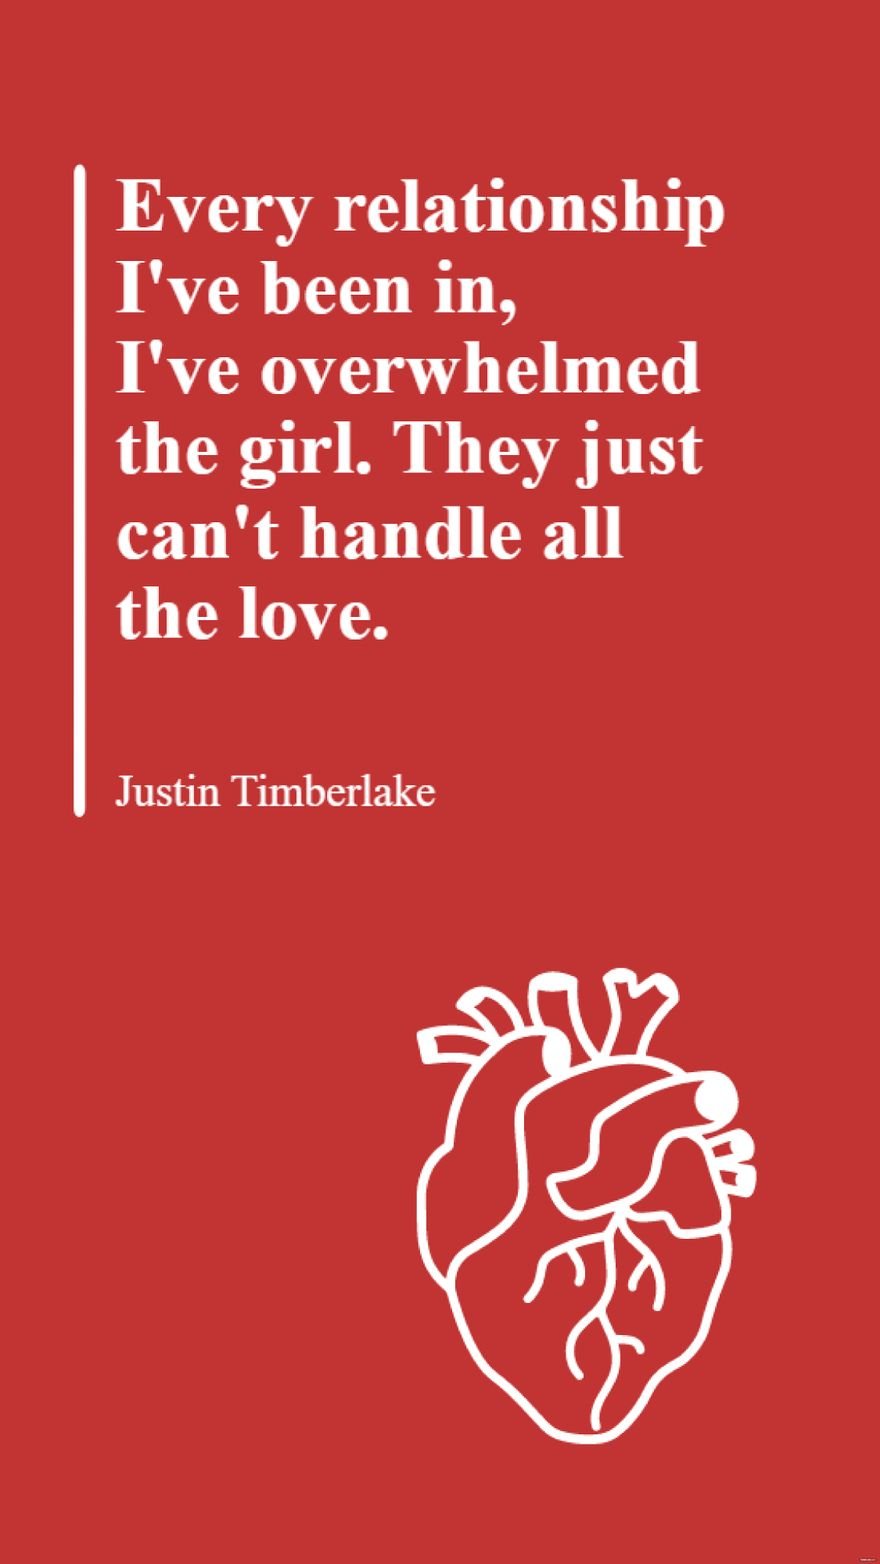 Justin Timberlake - Every relationship I've been in, I've overwhelmed the girl. They just can't handle all the love.